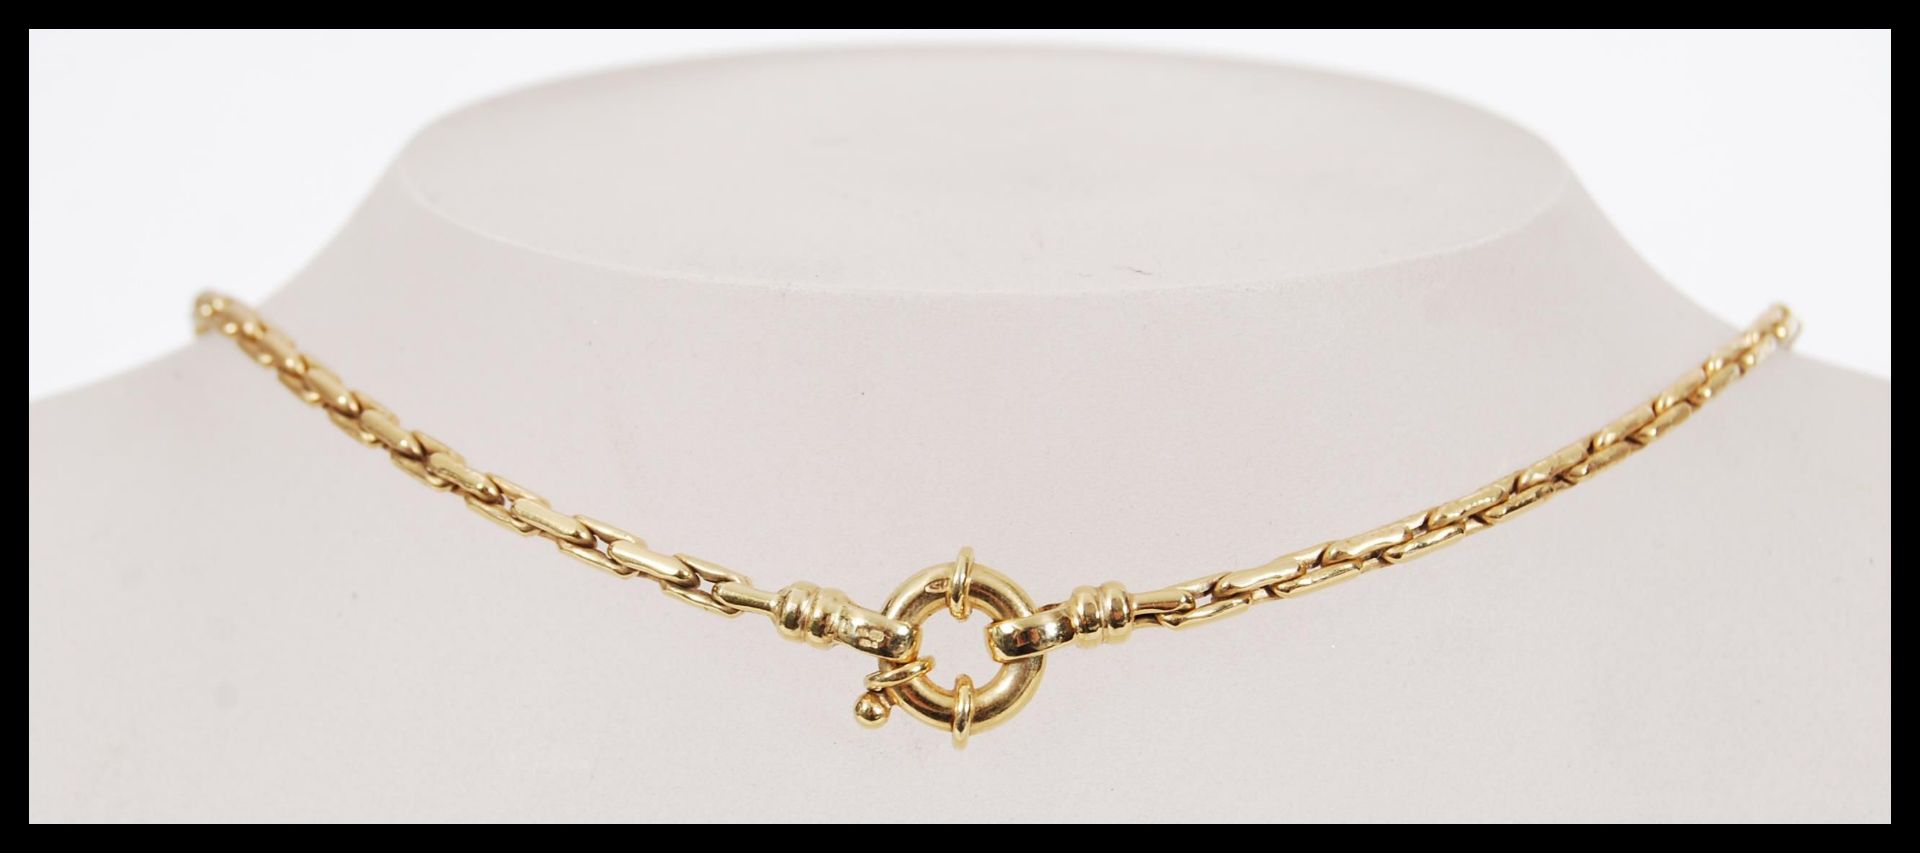 A hallmarked 9ct gold long boxlink necklace chain, having a large bolt ring clasp, with tasseled - Image 4 of 4